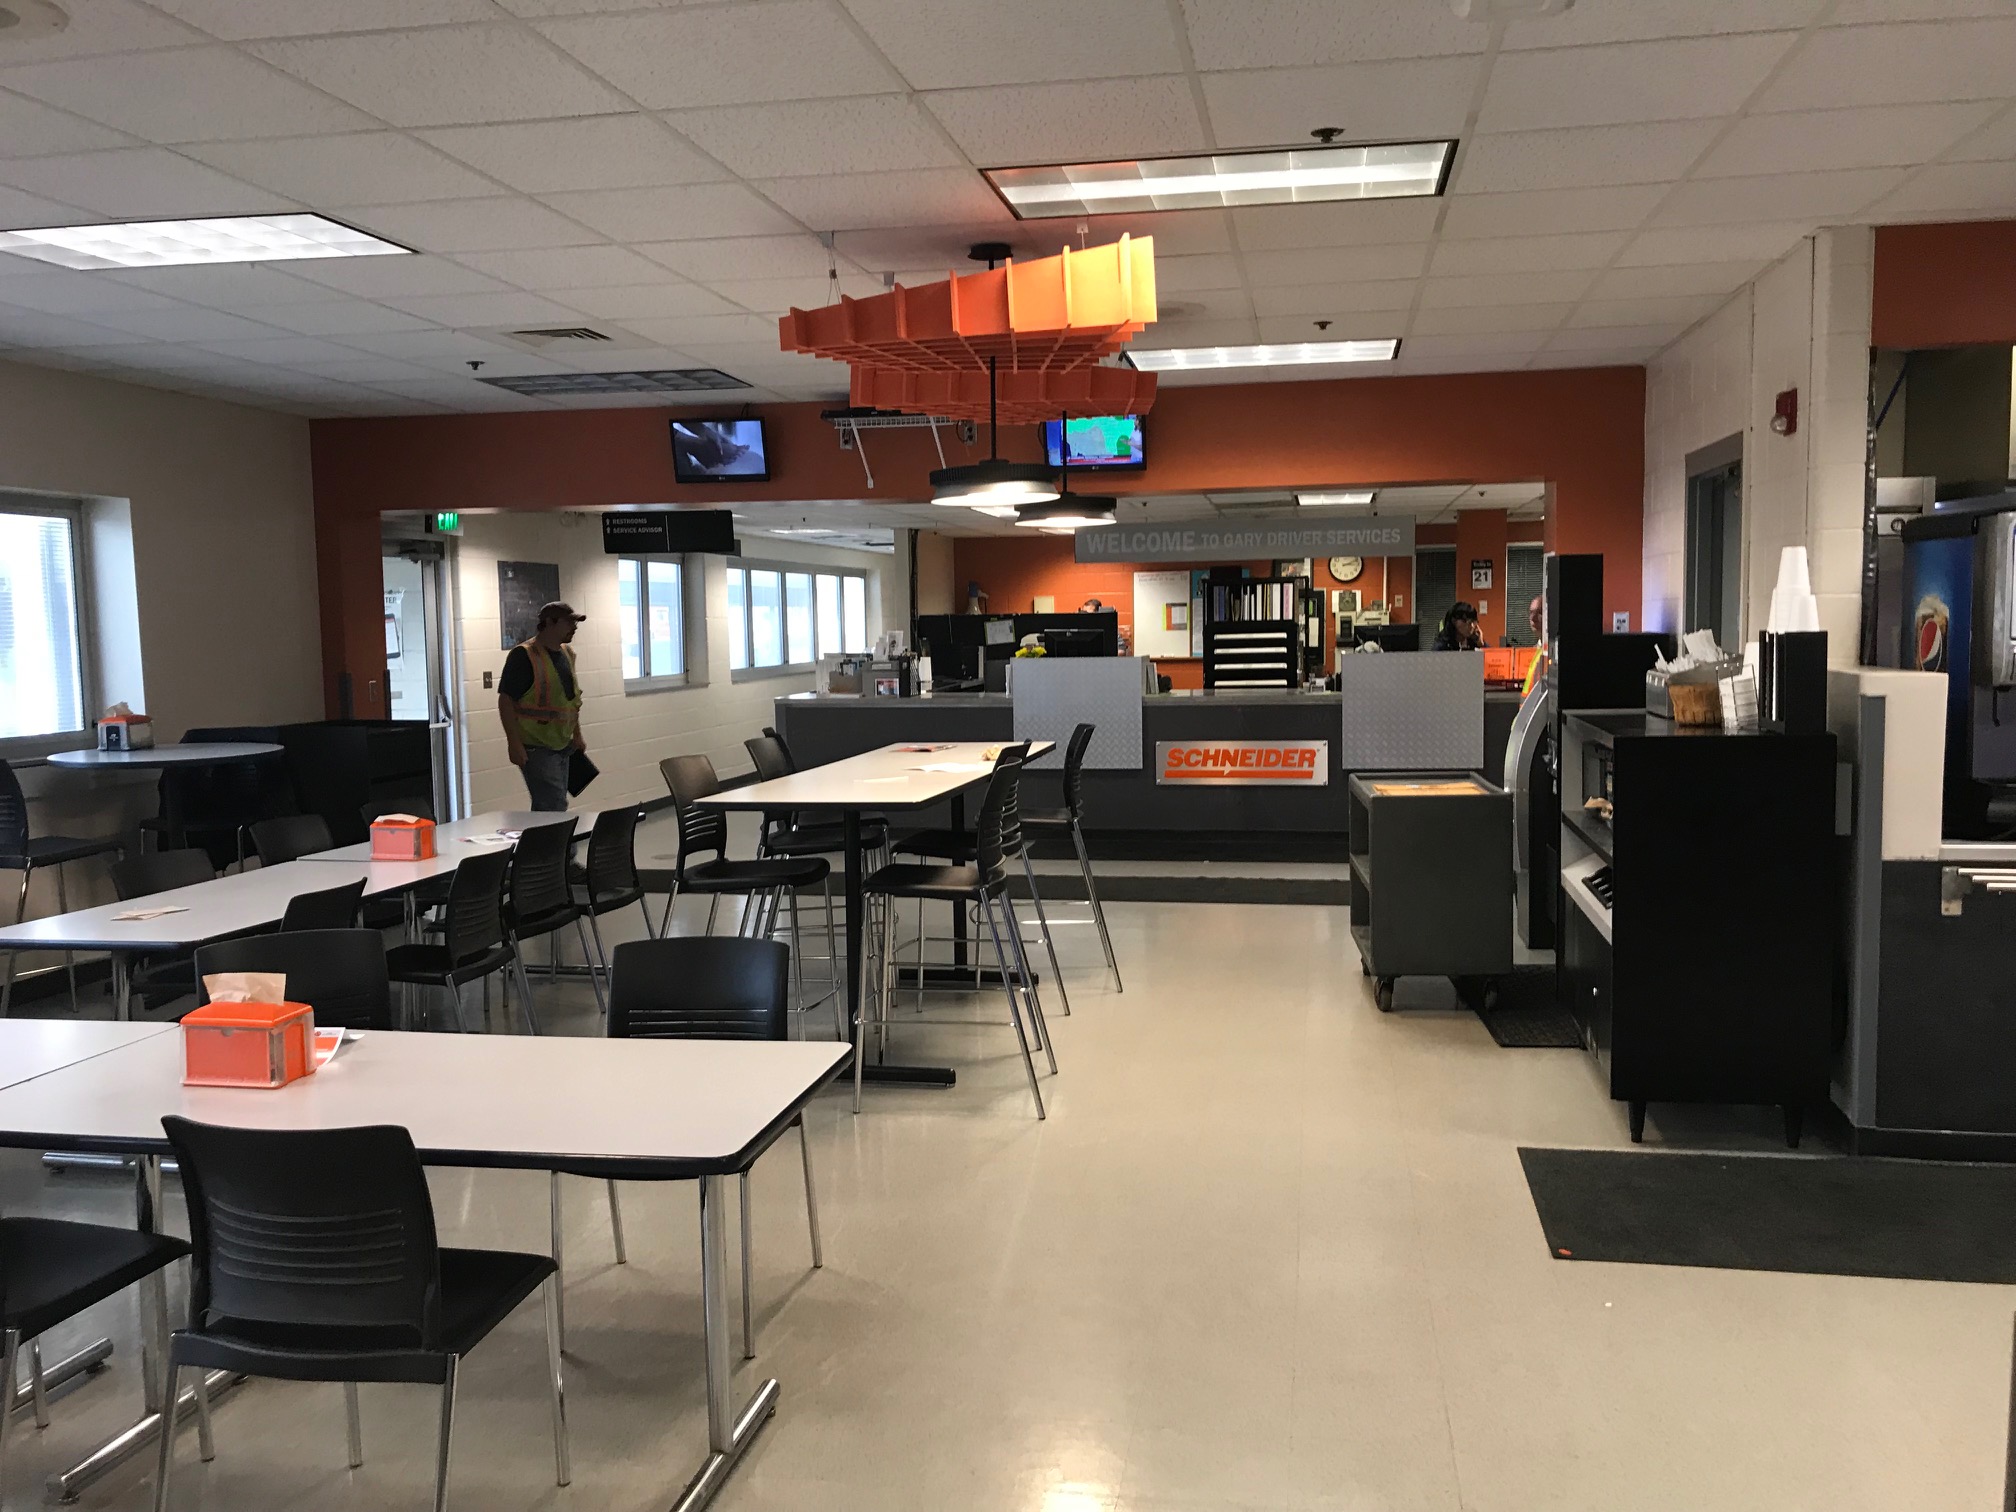 Remodeled Schneider Gary Facility Driver Dining Area